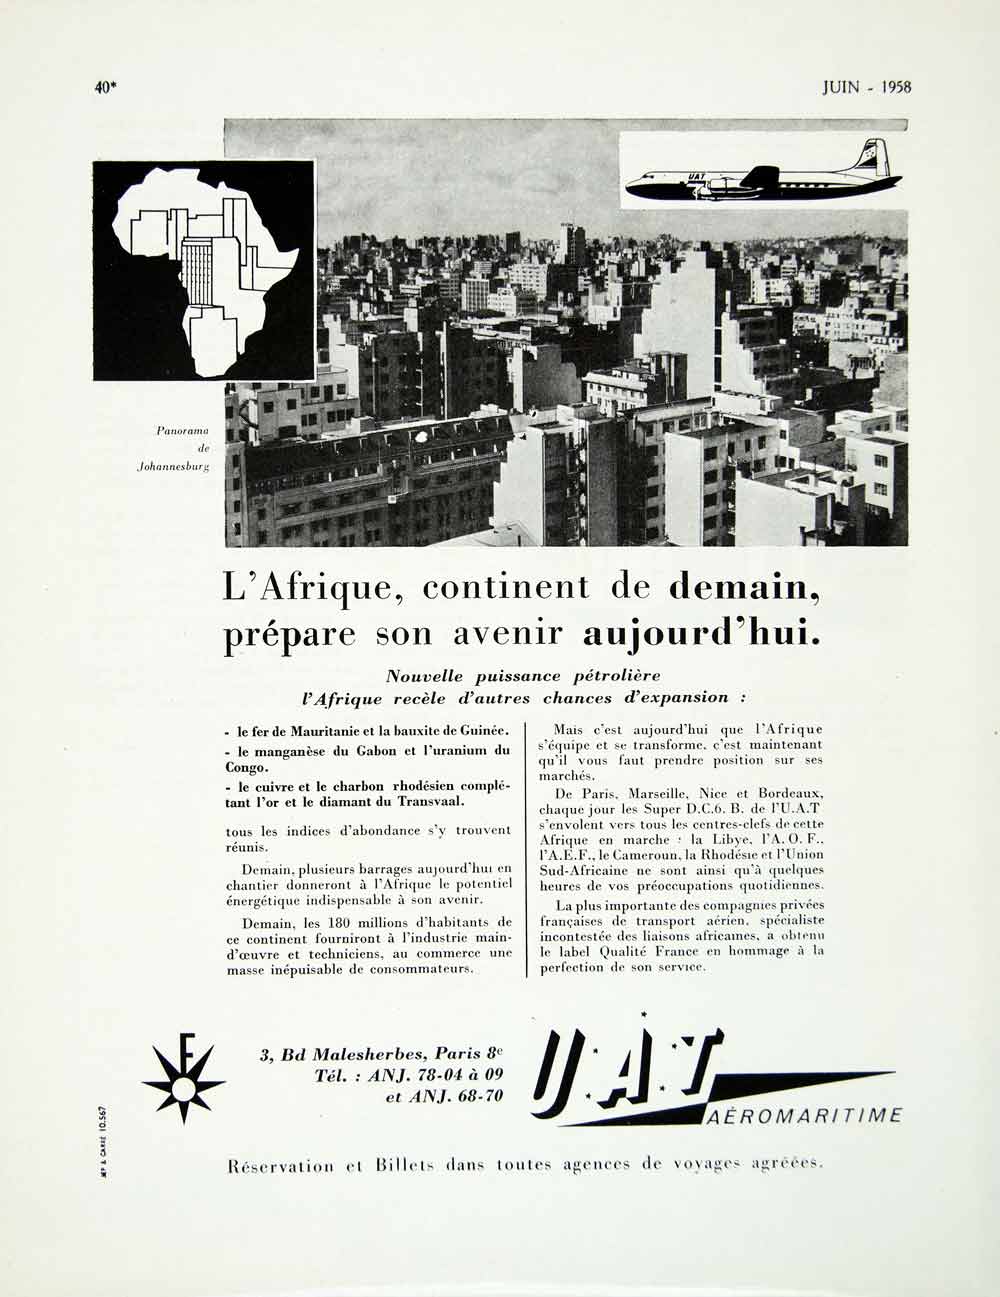 1958 Ad UAT Union Aeromaritime Transport French Airline Africa Plane Travel VEN1